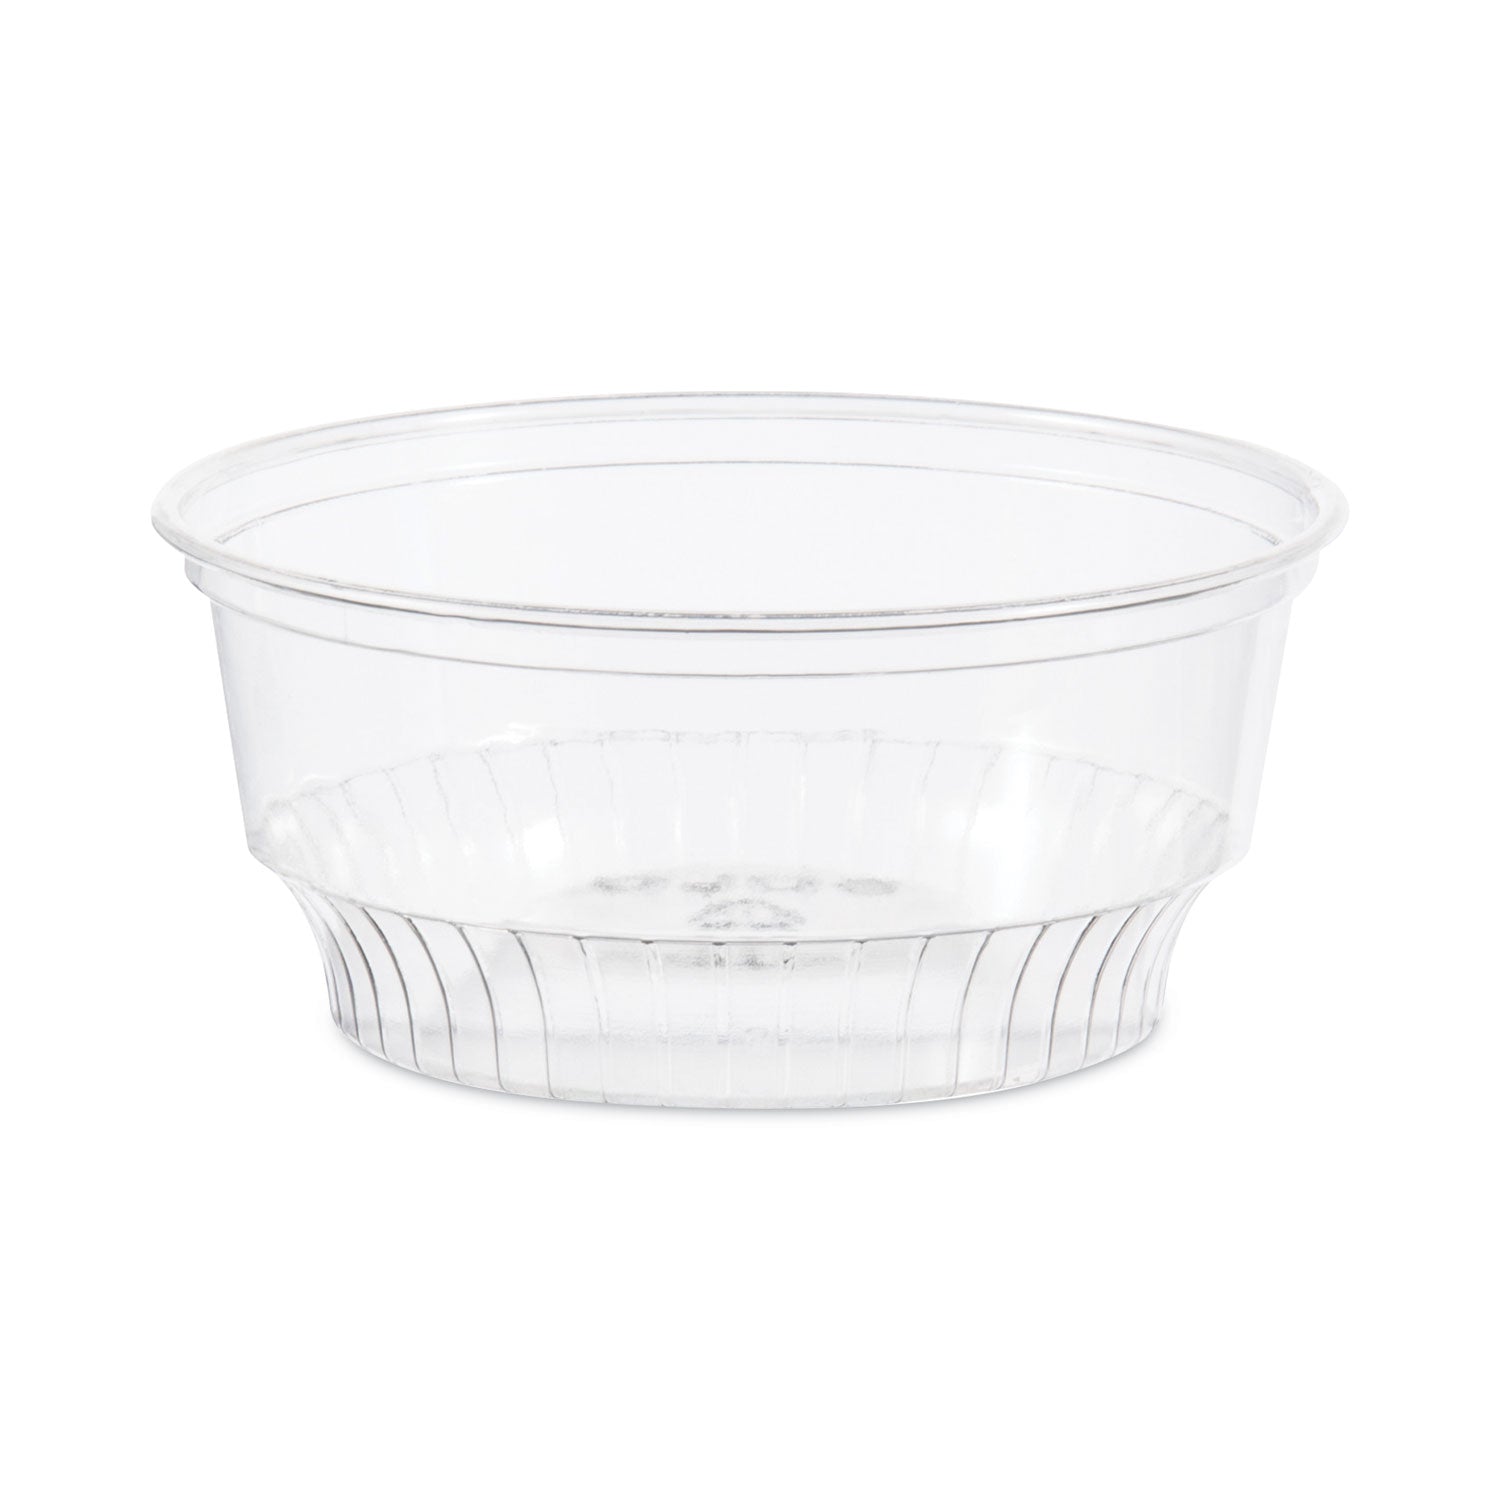 soloserve-dome-cup-lids-fits-5-oz-to-8-oz-containers-clear-50-pack-20-packs-carton_sccsdl58 - 1